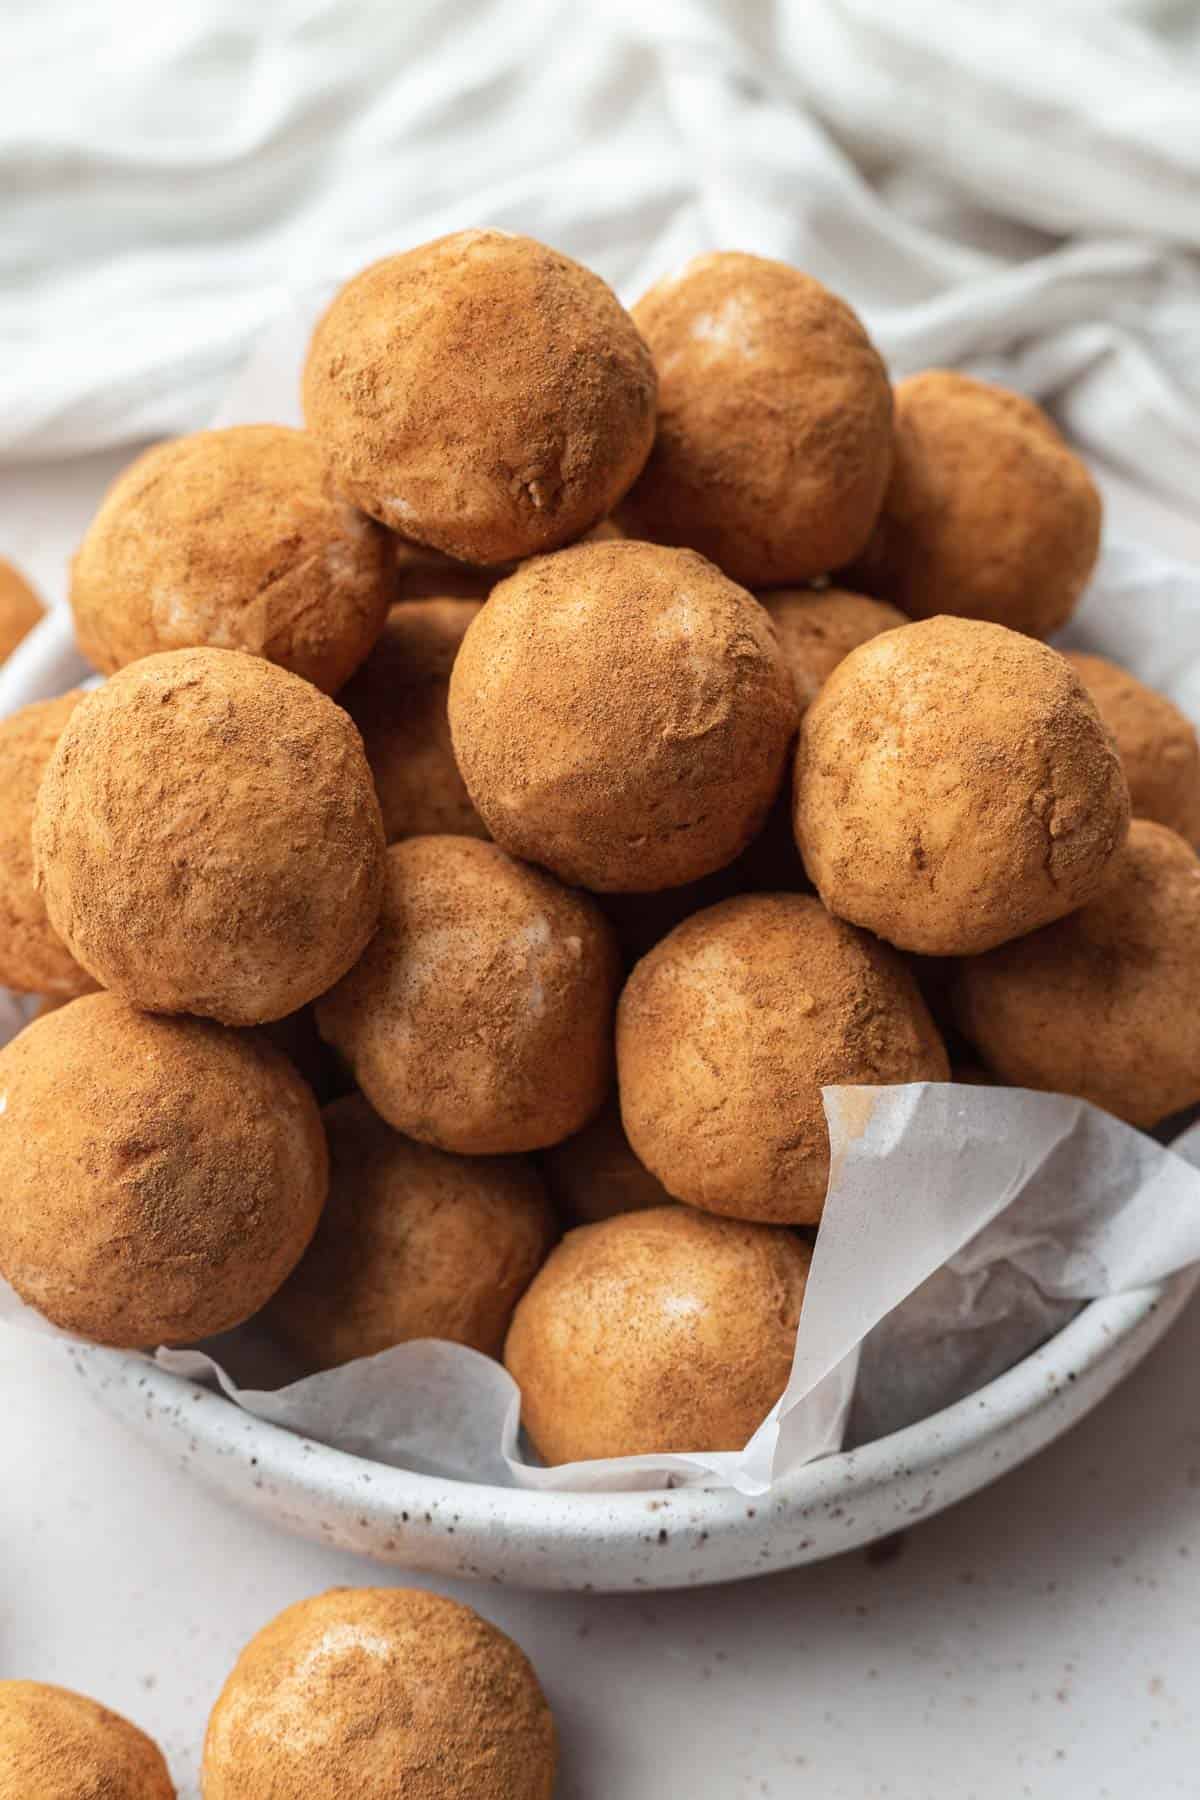 a large pile of Irish potatoes stacked in a white bowl